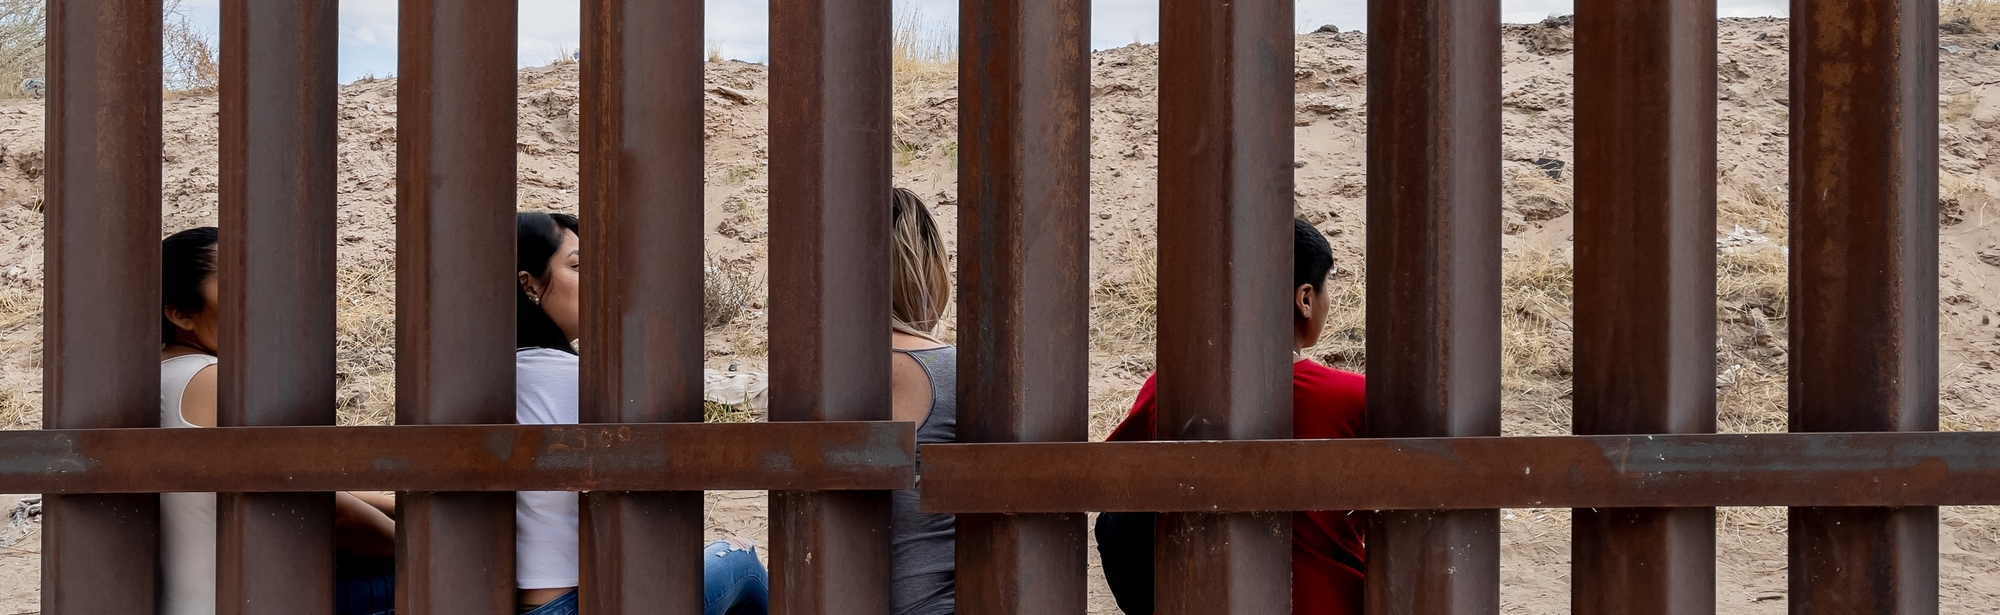 Small group of Mexican people sitting at border wall between Mexico and Texas